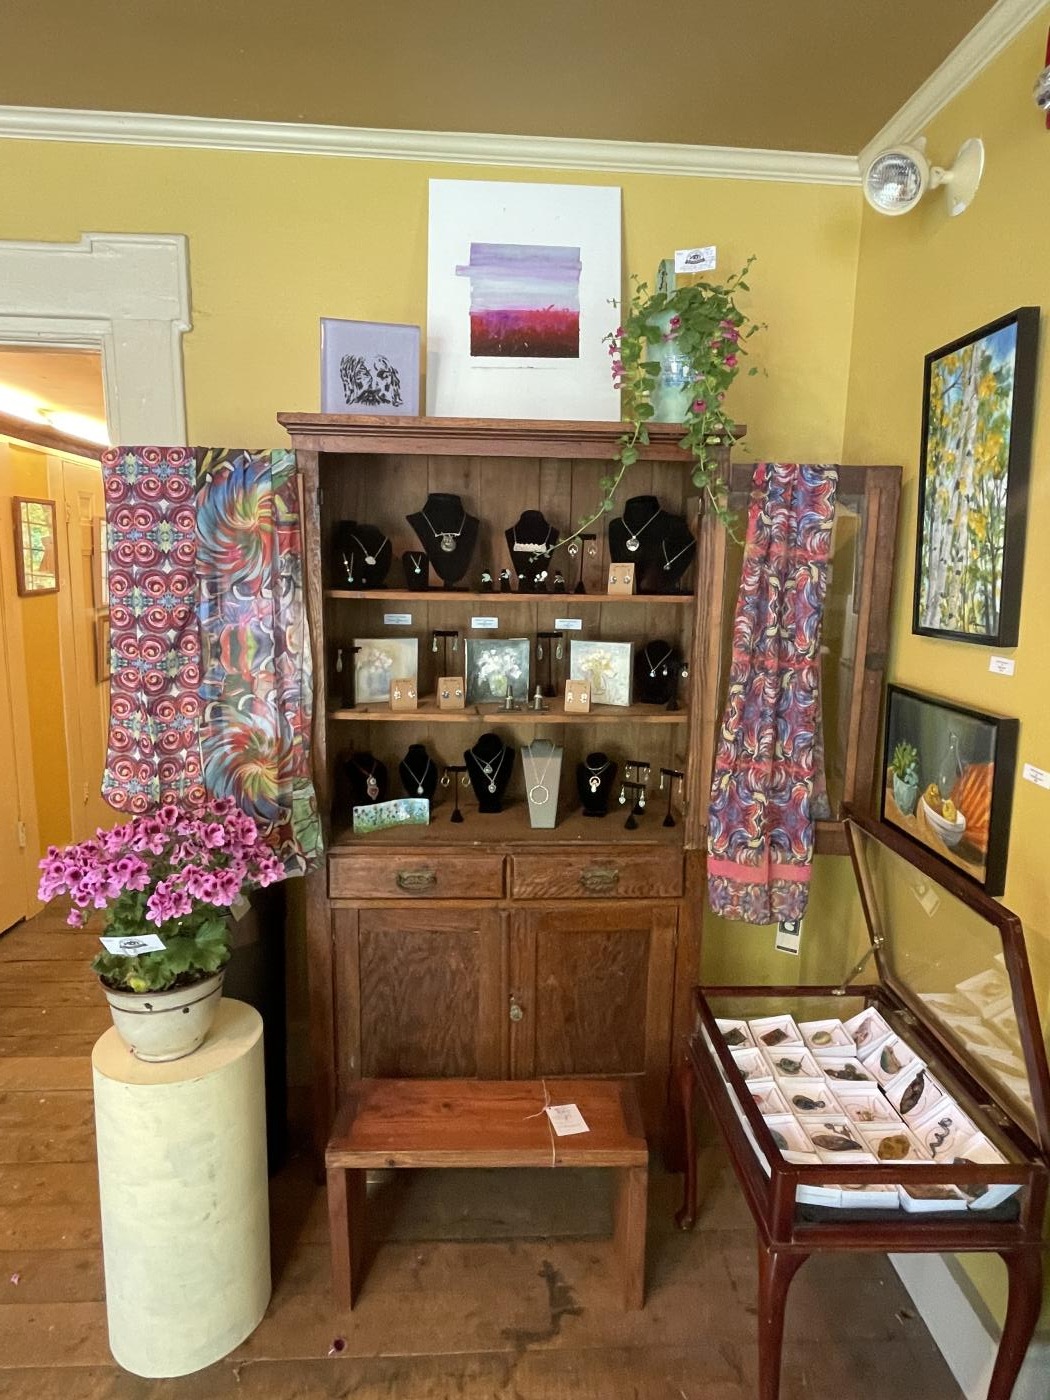 7th Annual Spring Arts and Fine Crafts Show - 2nd Weekend